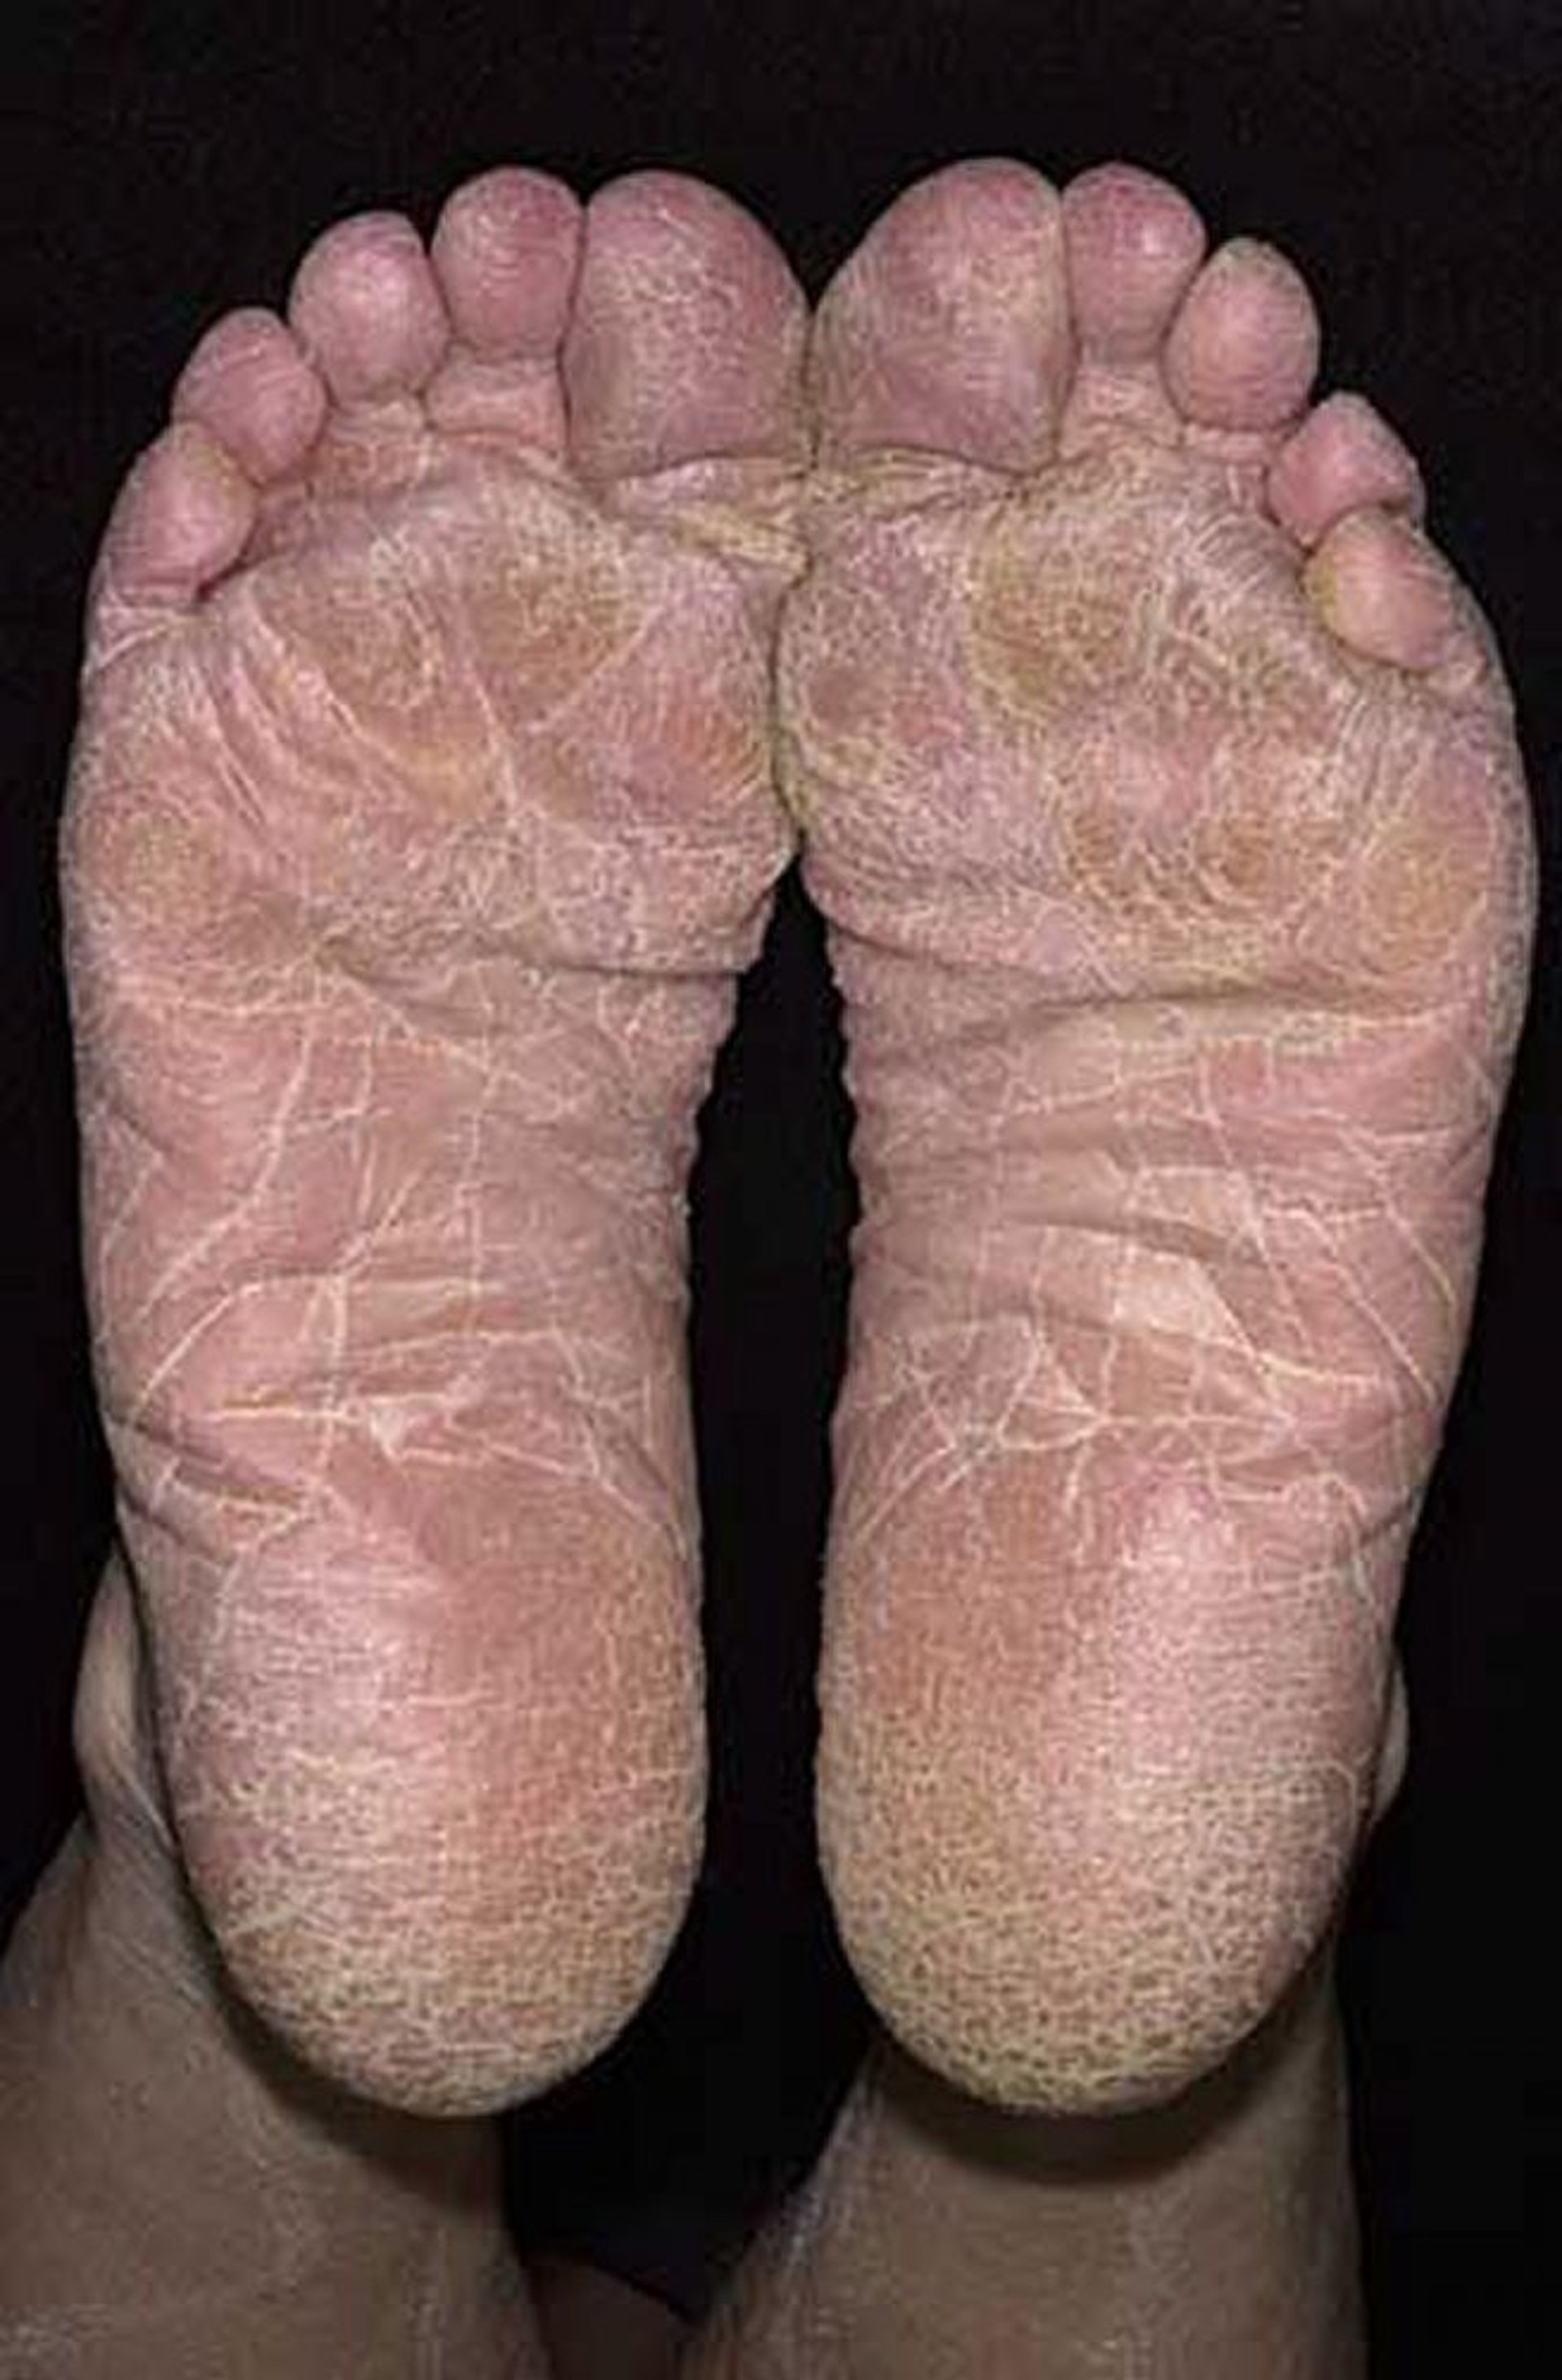 Scaling of the Entire Sole in Athlete's Foot (Tinea Pedis)